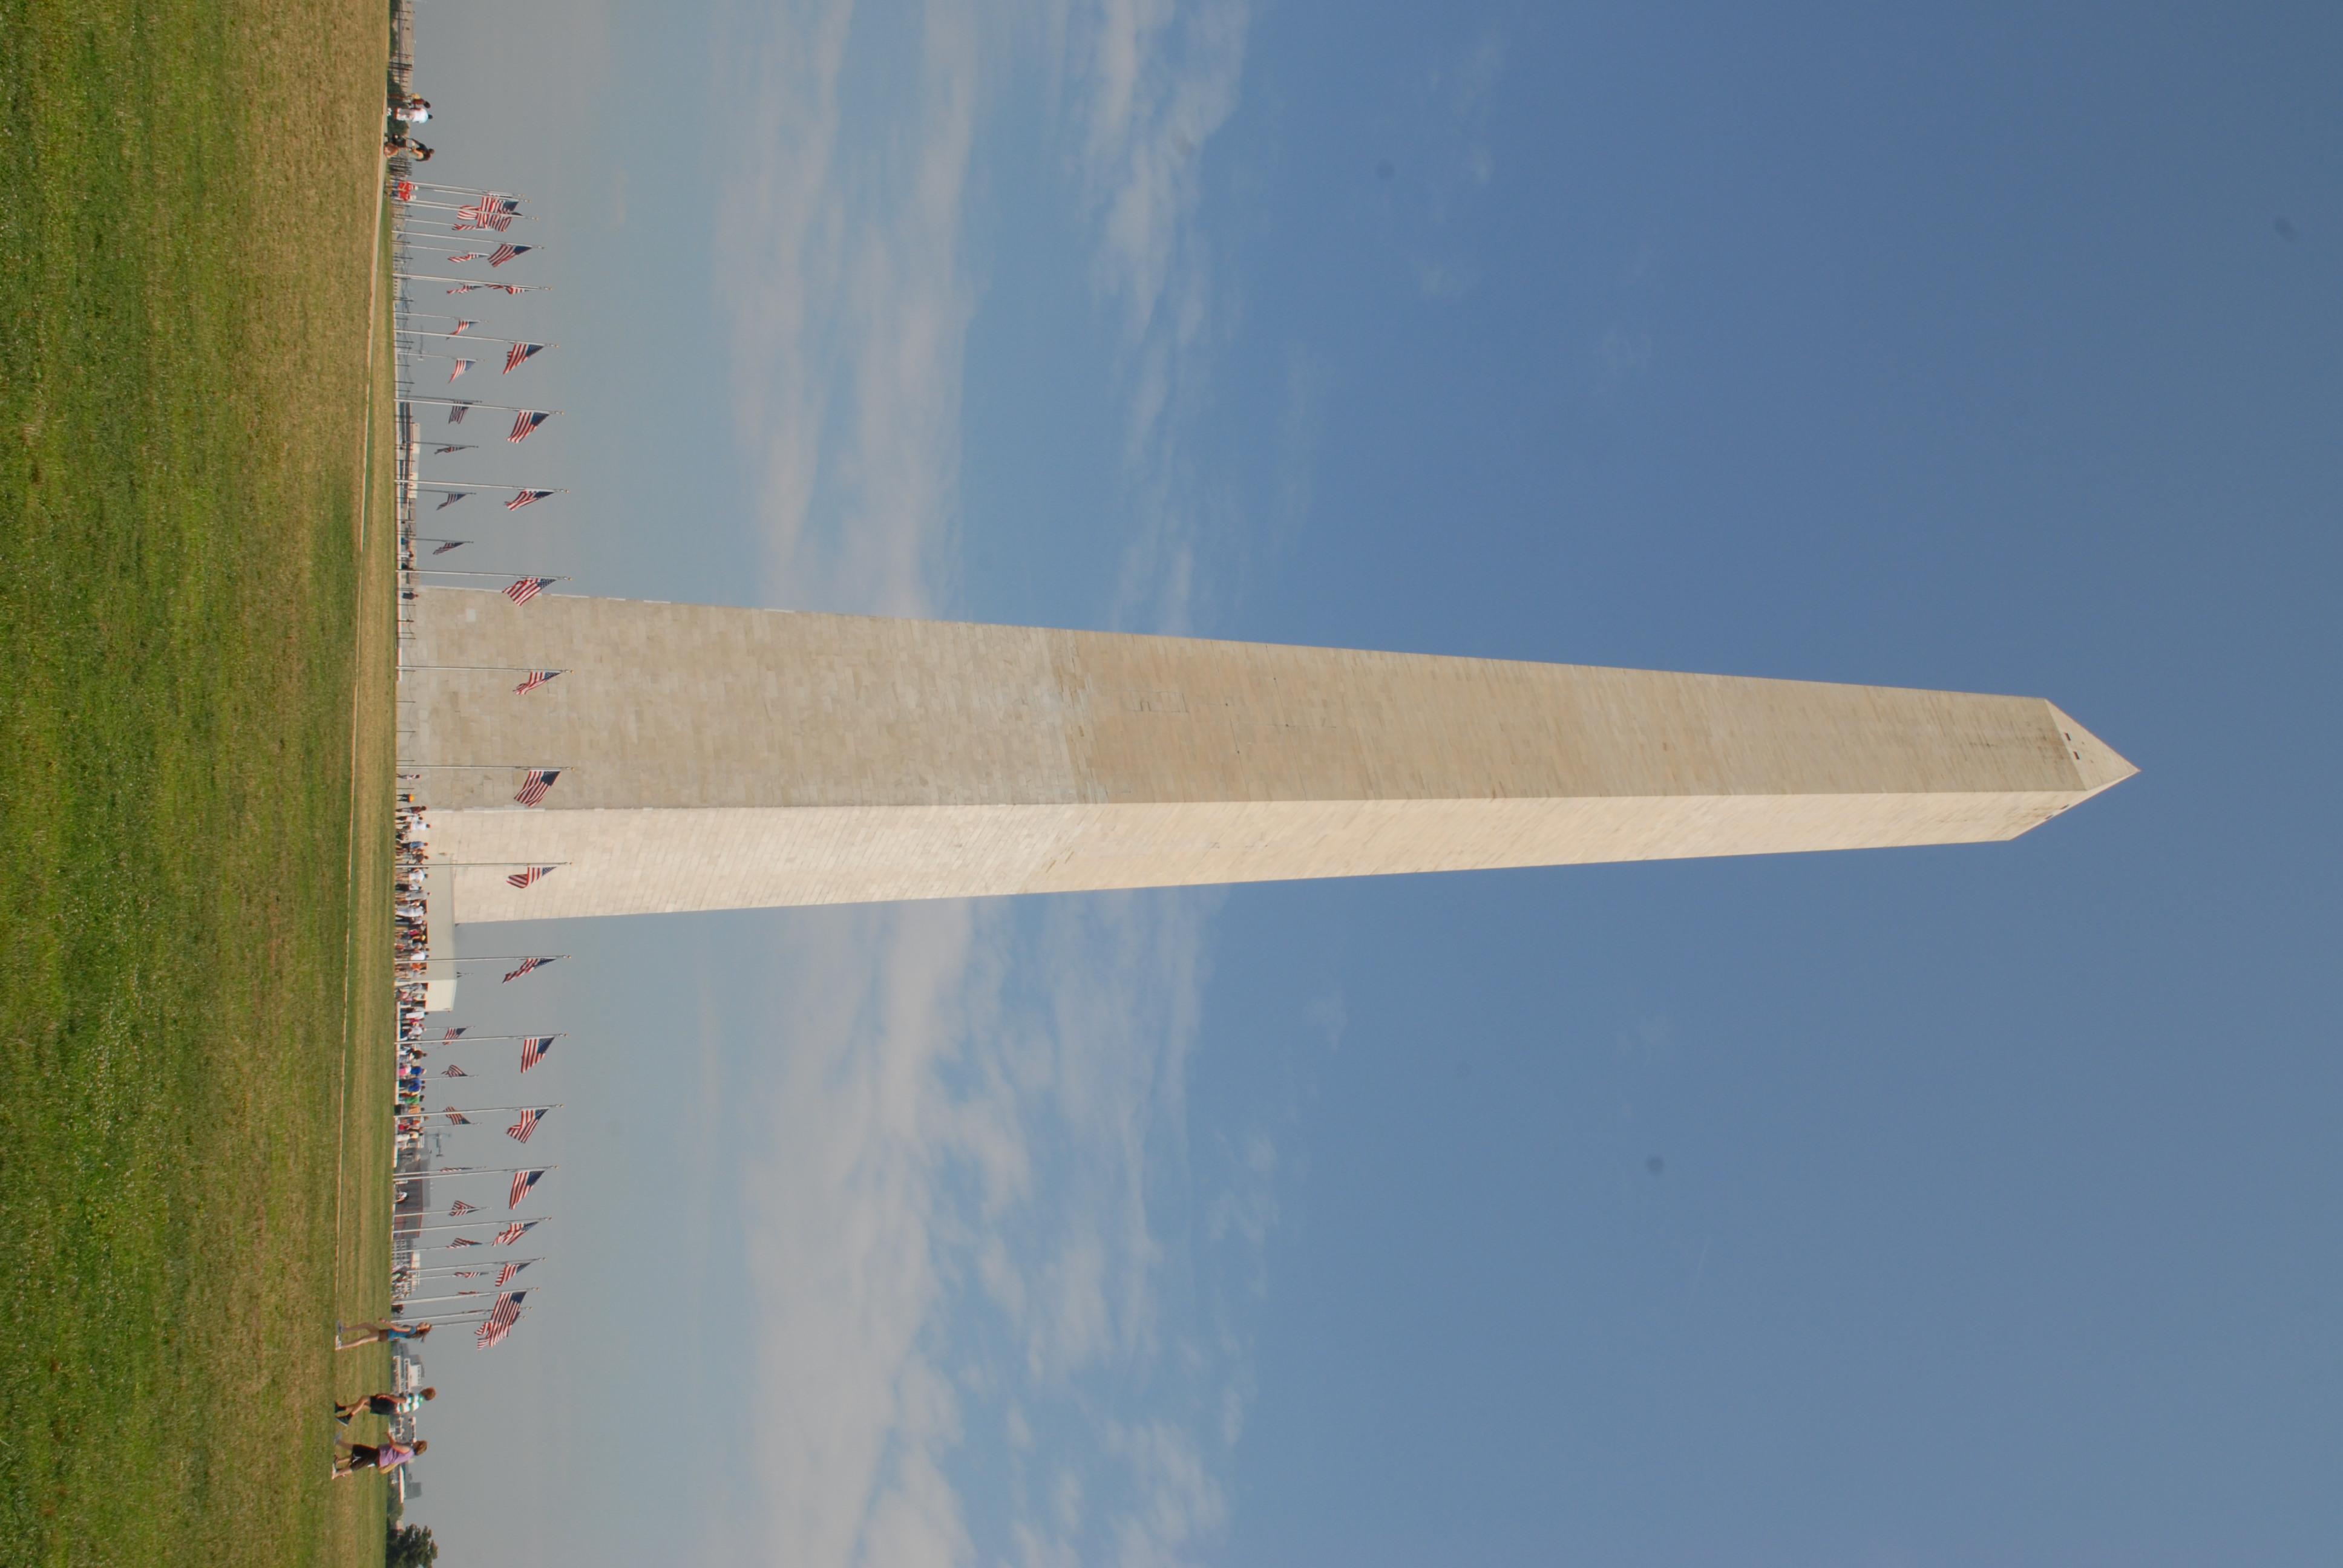 The Washington Monument, a white marble obelisk, towers above a ring of US Flags.